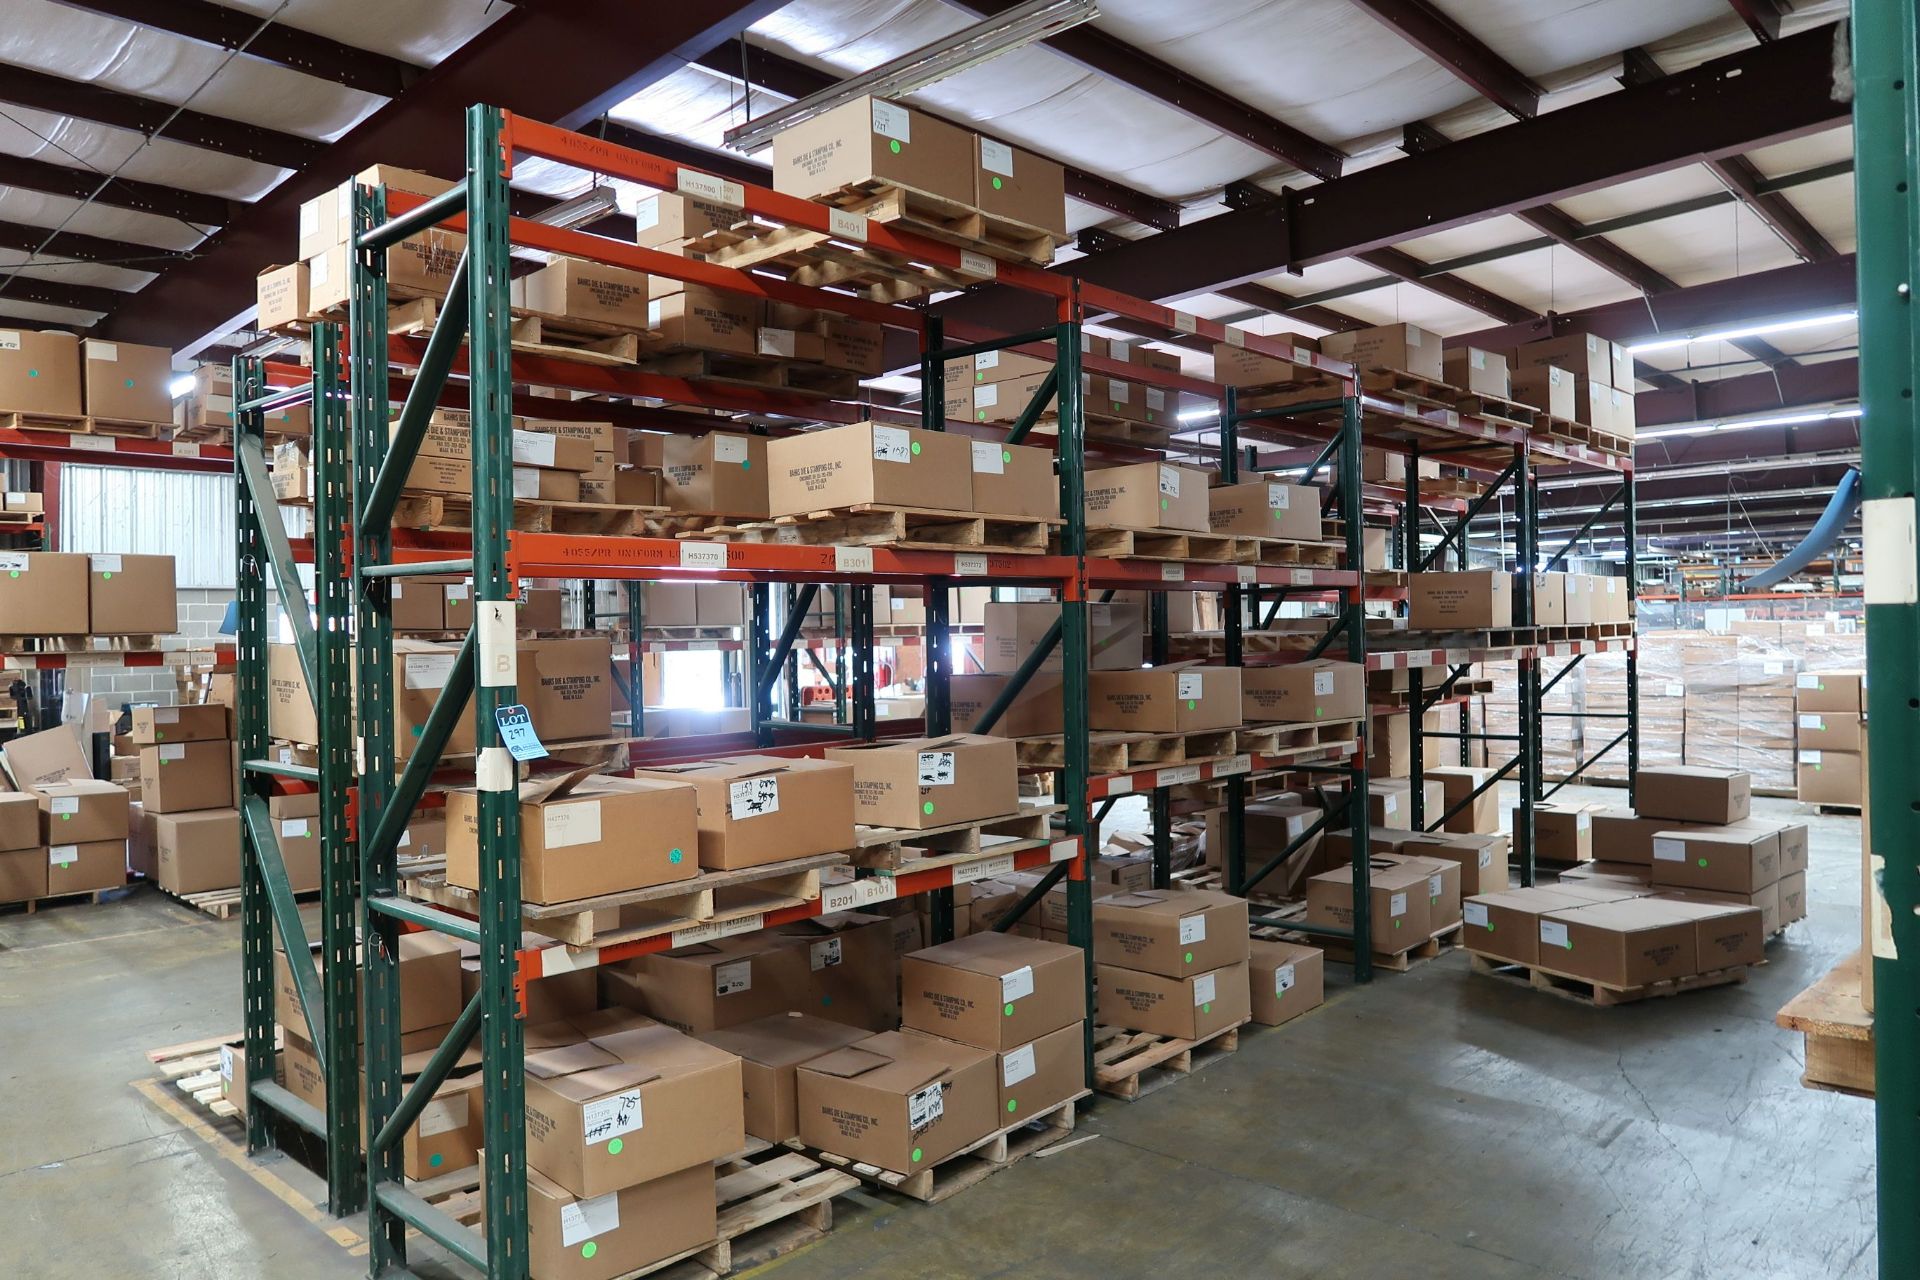 SECTIONS 86" X 30" X 120" ADJUSTABLE BEAM PALLET RACK **RACKING ONLY - DELAYED REMOVAL - PICKUP 10